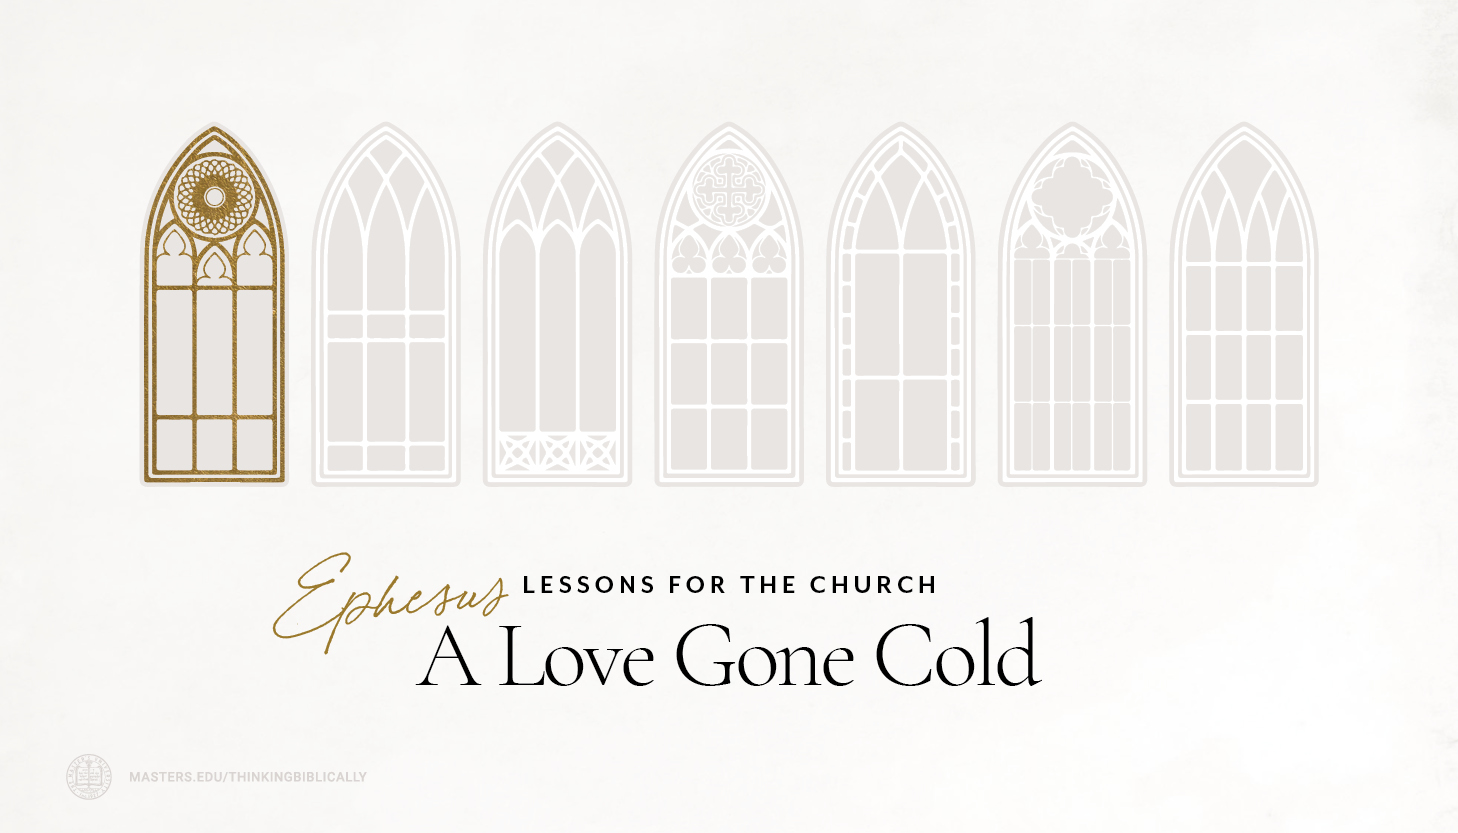 Ephesus: A Love Gone Cold